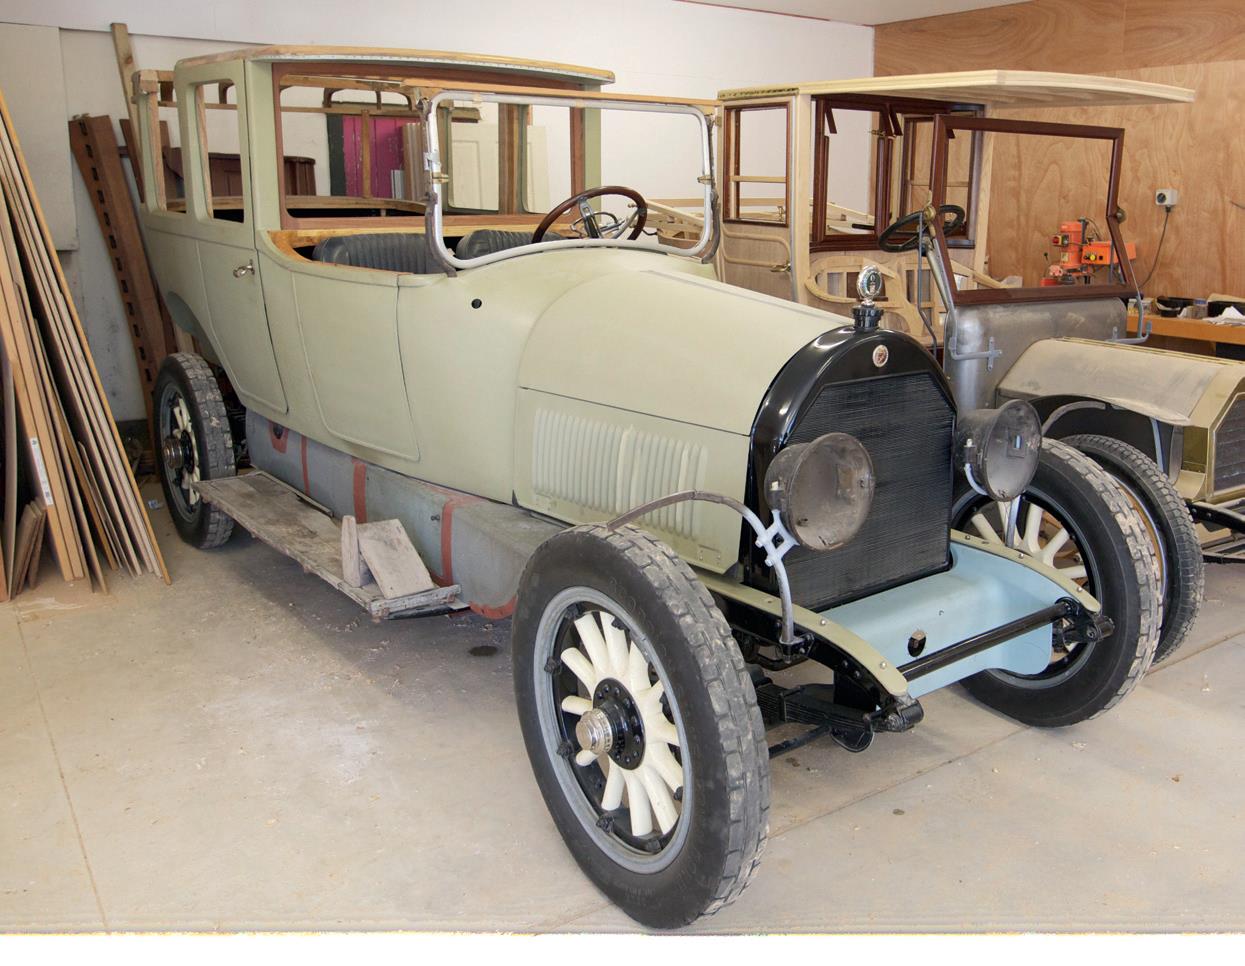 Sitting alongside the Arrol Johnston is another project, a 1918 Cadillac Landaulet.